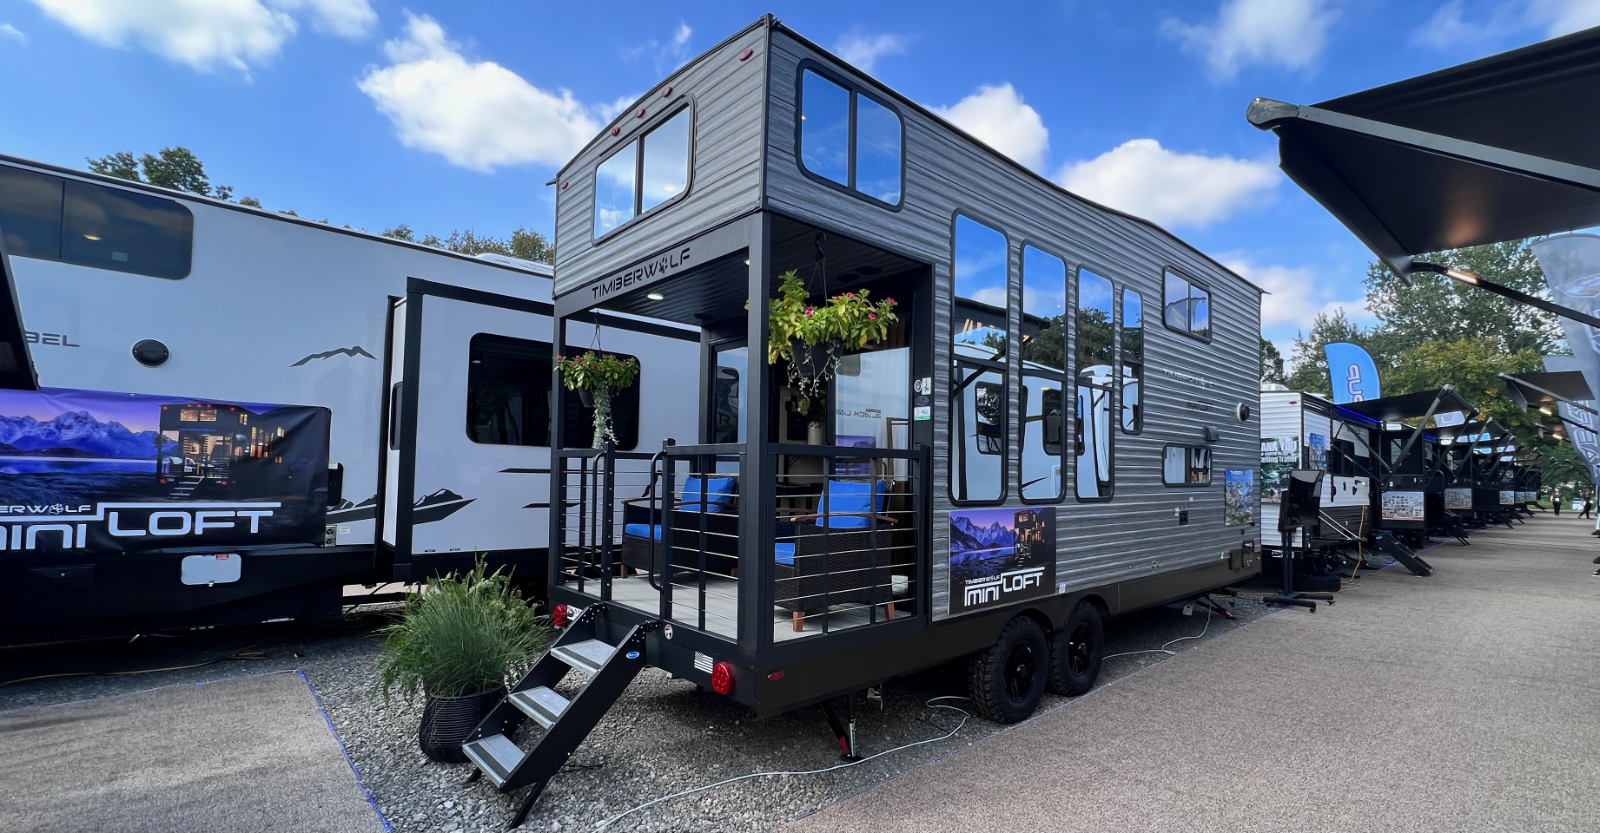 The Timberwolf Mini Loft 16ML RV With Back Patio Is Designed as a